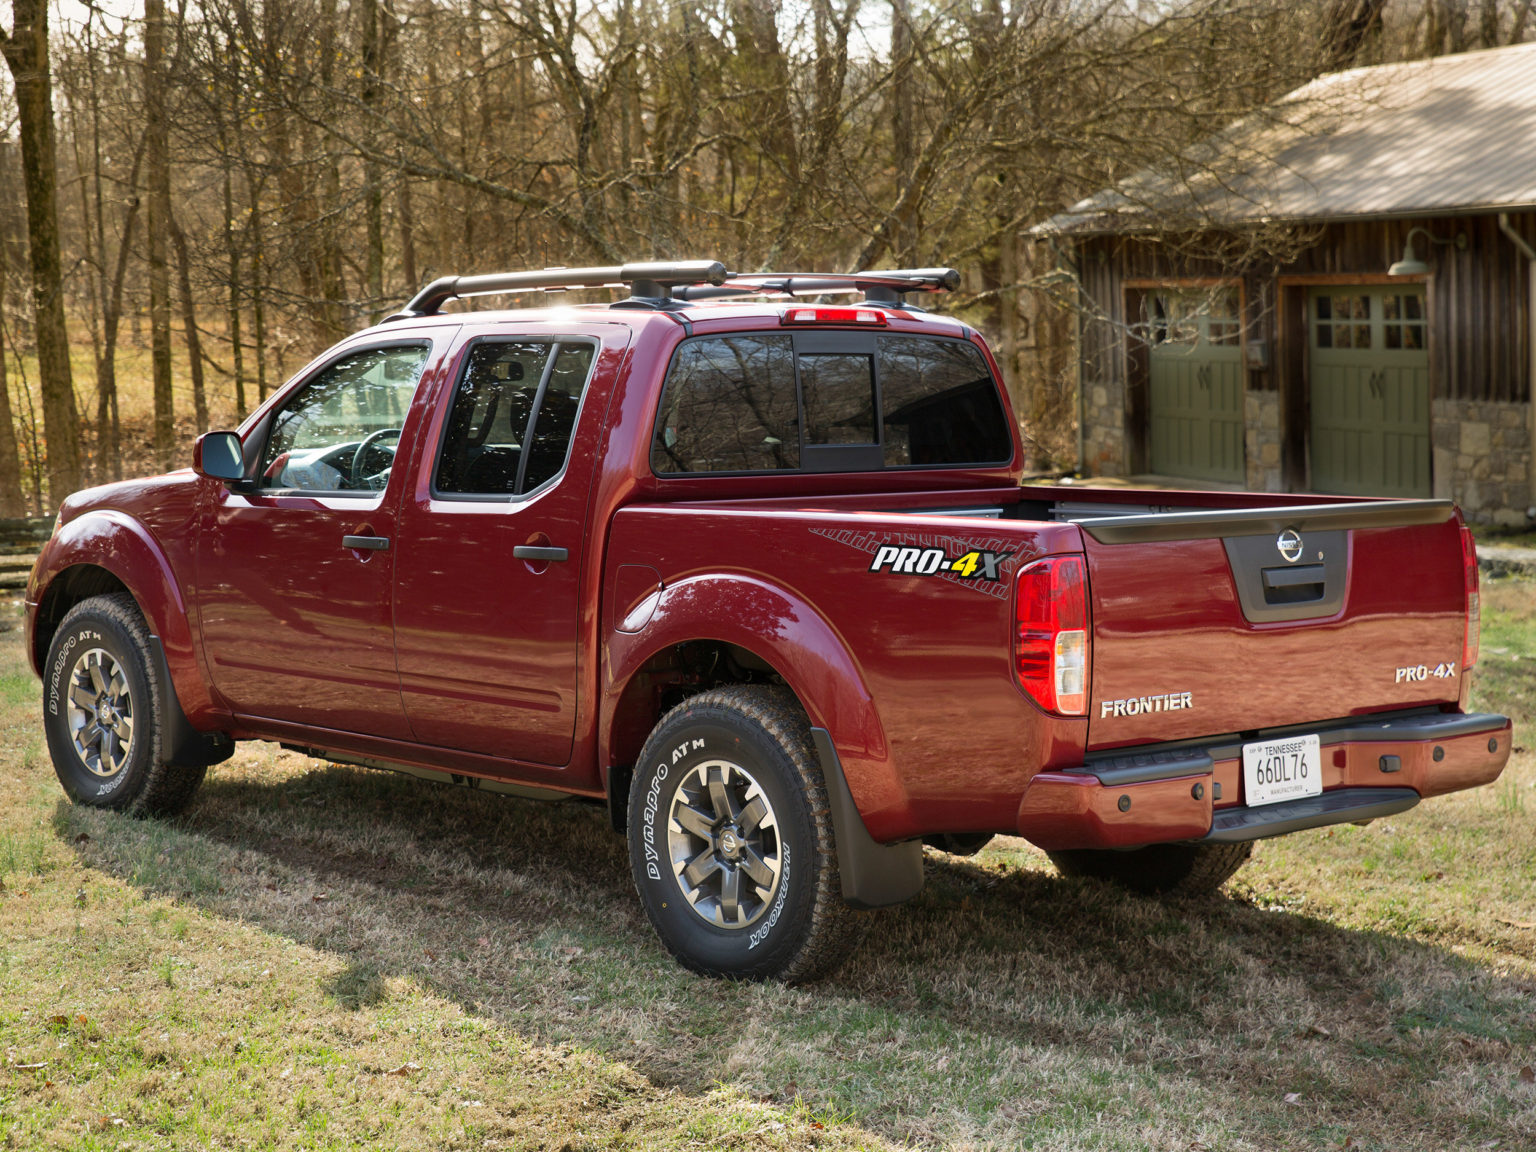 The Nissan Frontier gives a hint at what's to come with a redesigned truck.